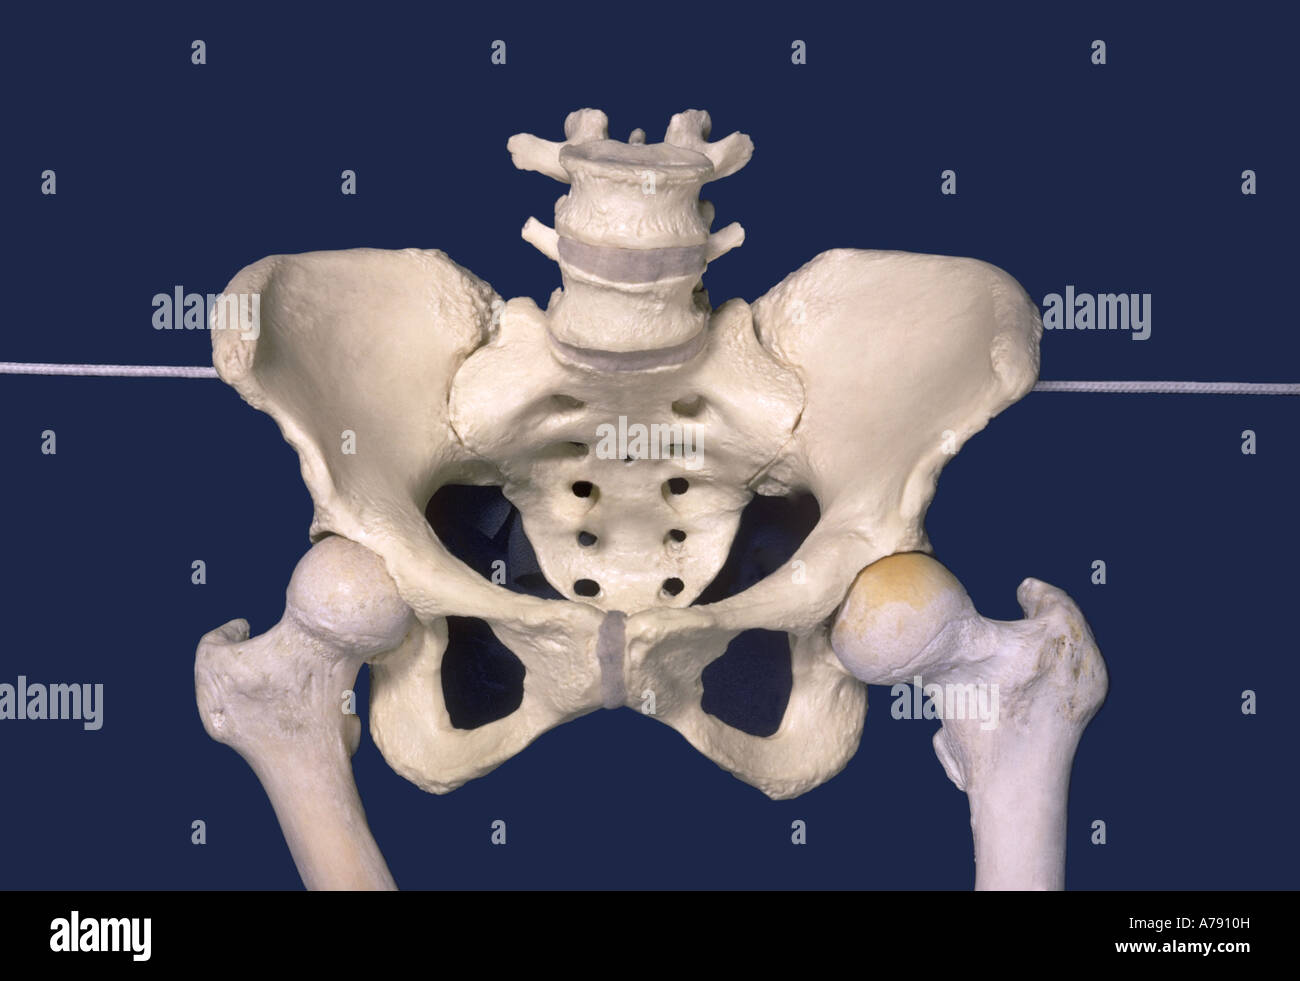 A pelvic model showing fixed abduction of the hip. Stock Photo